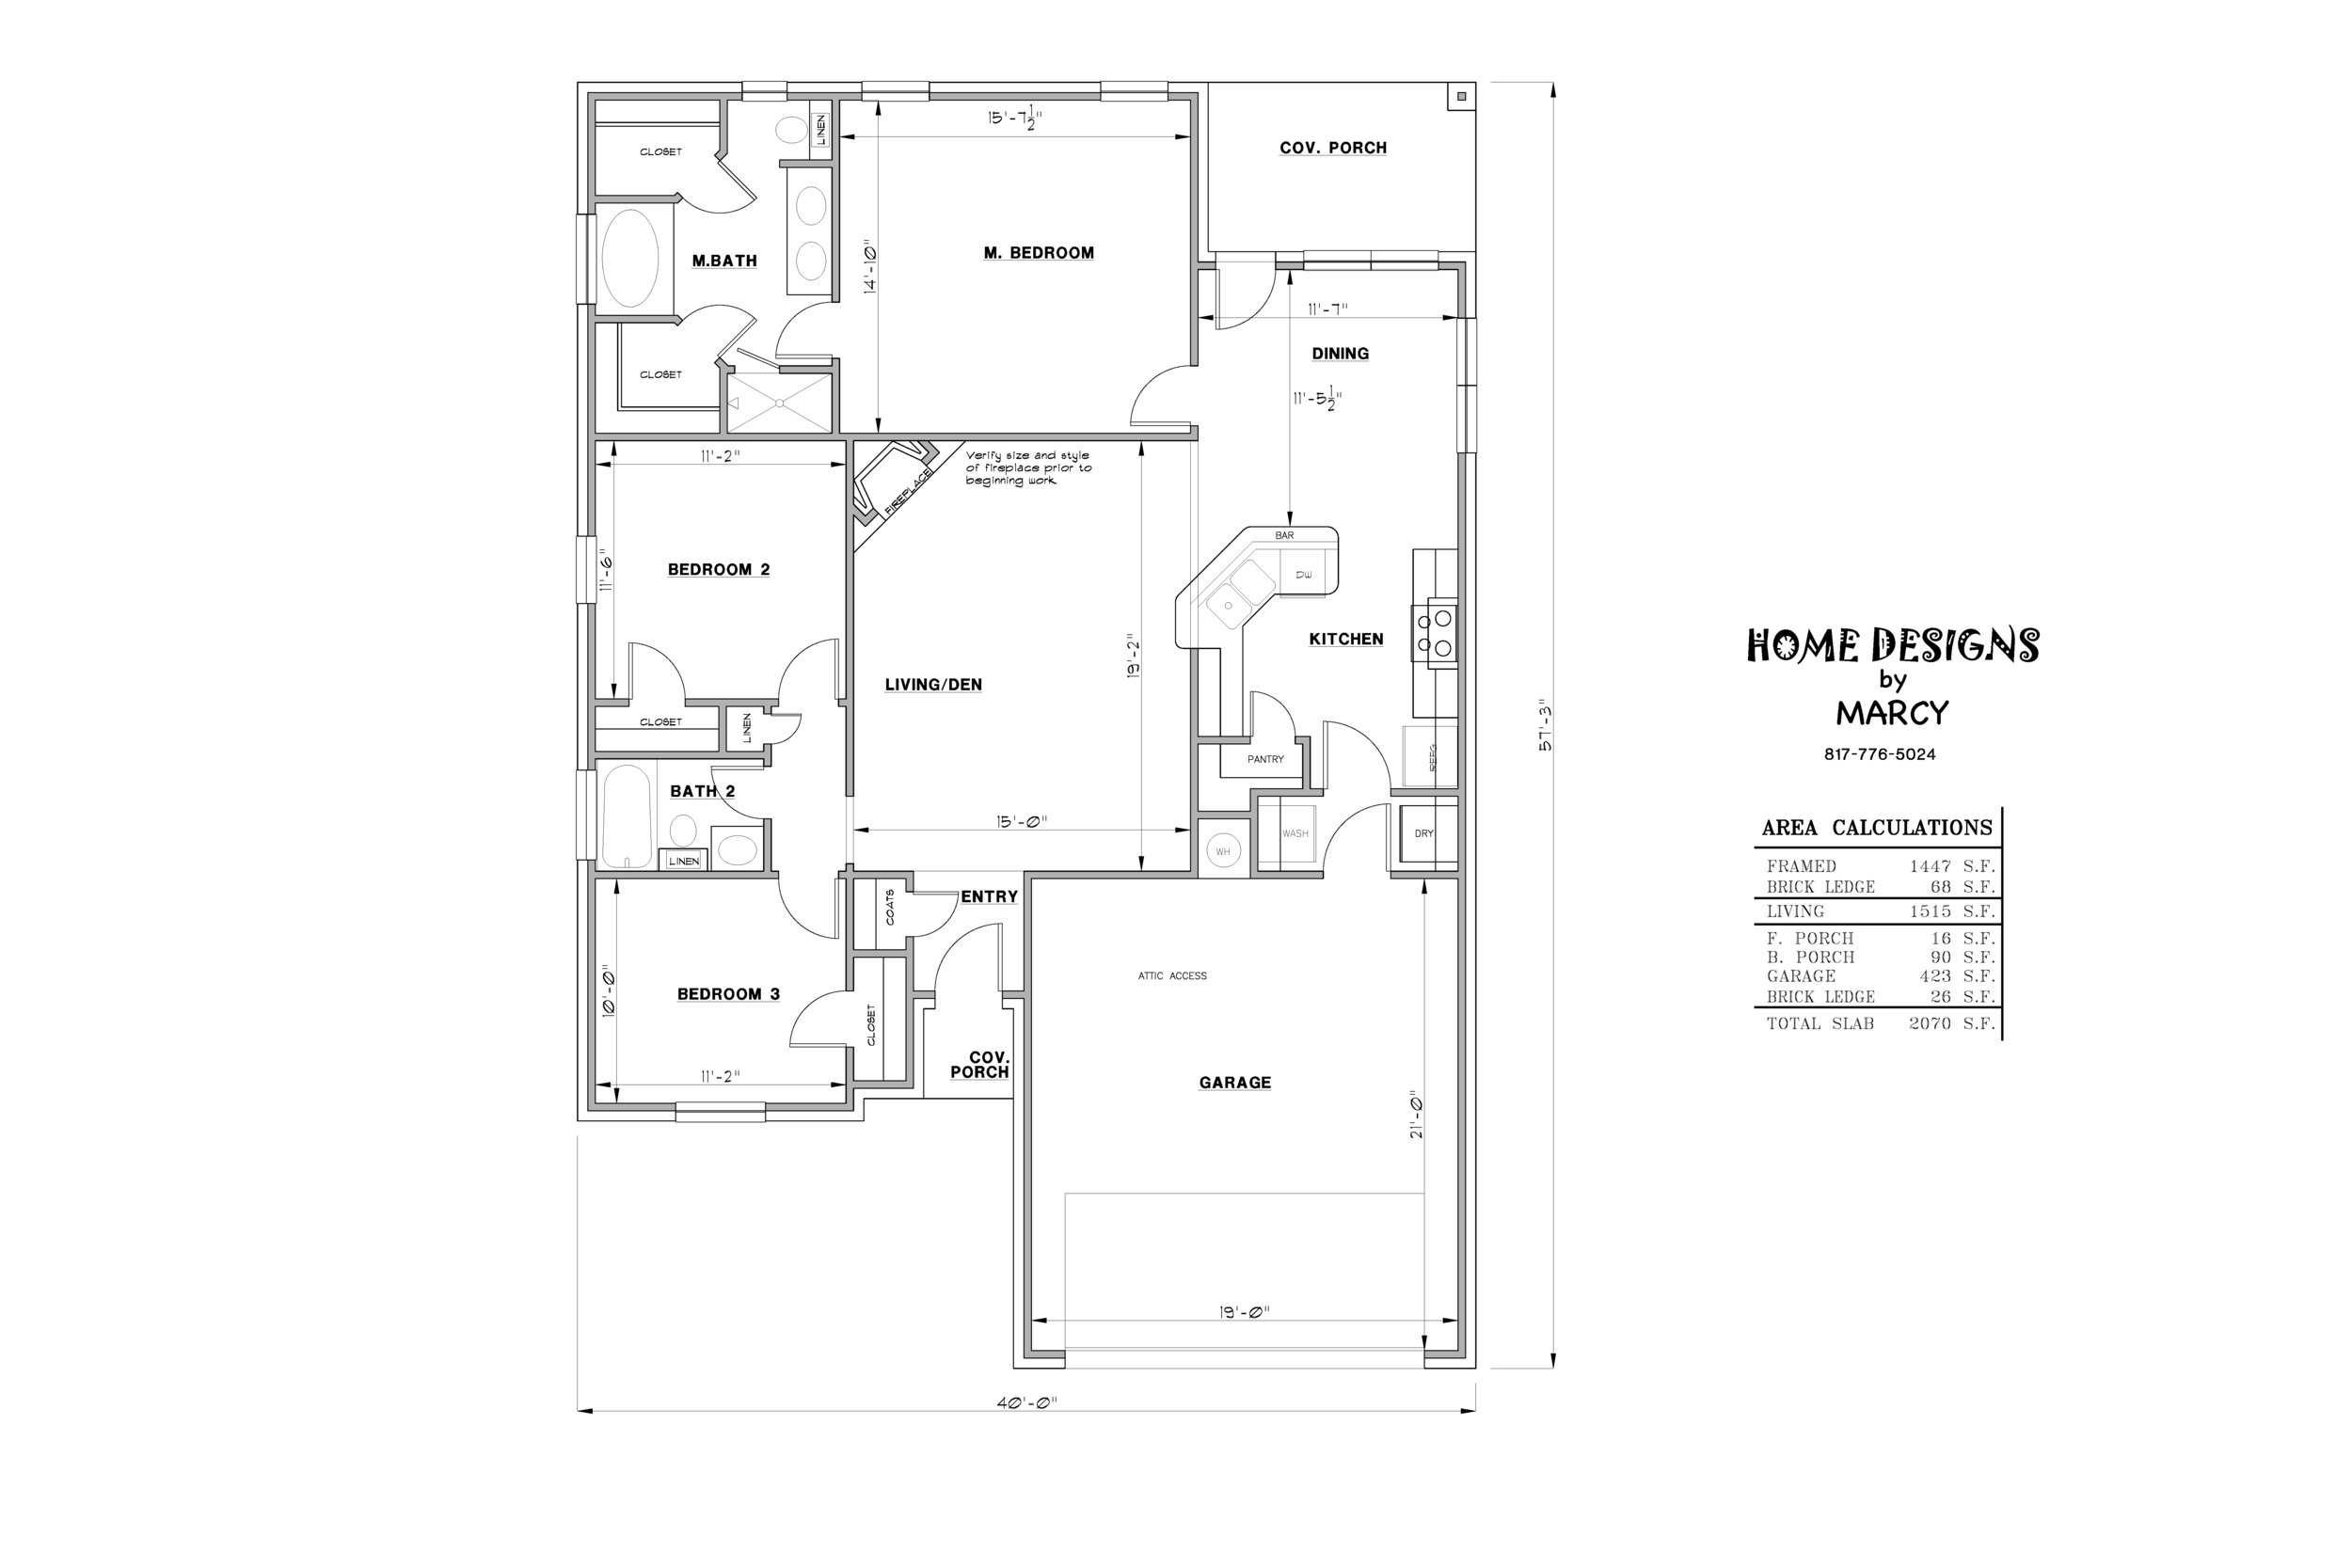 Plans — Home Designs by Marcy